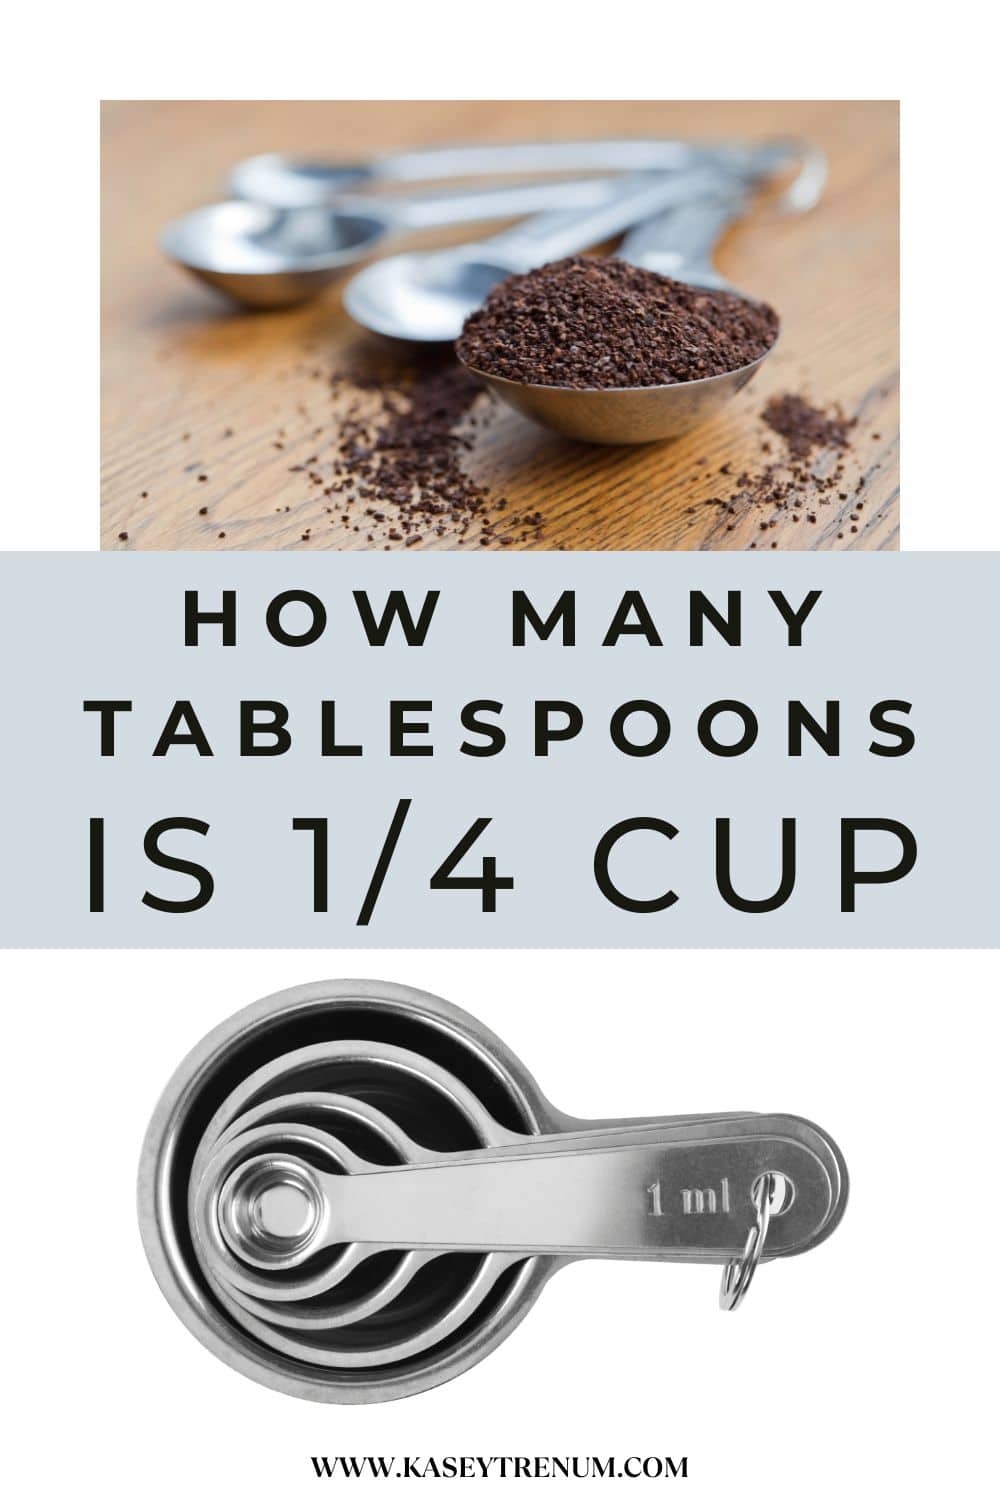 Photograph of measuring spoons fanned out at top, banner with text 'How Many Tablespoons is 1/4 Cup' in middle, three measuring cups nested in bottom